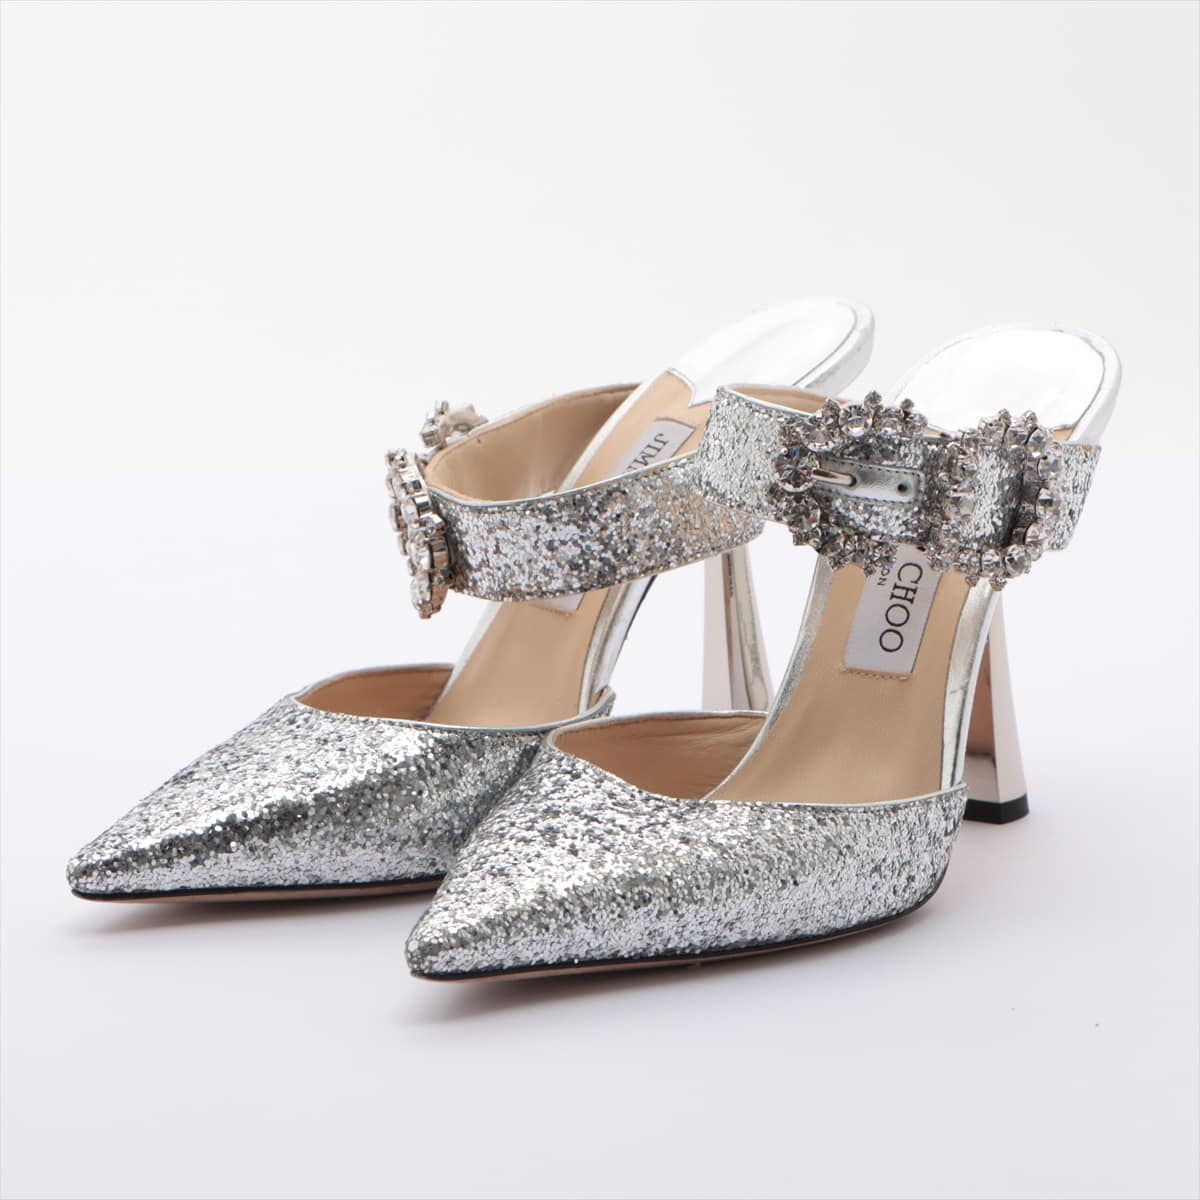 Jimmy Choo Glitter Pumps 39 Ladies' Silver SMOKEY with crystal buckle